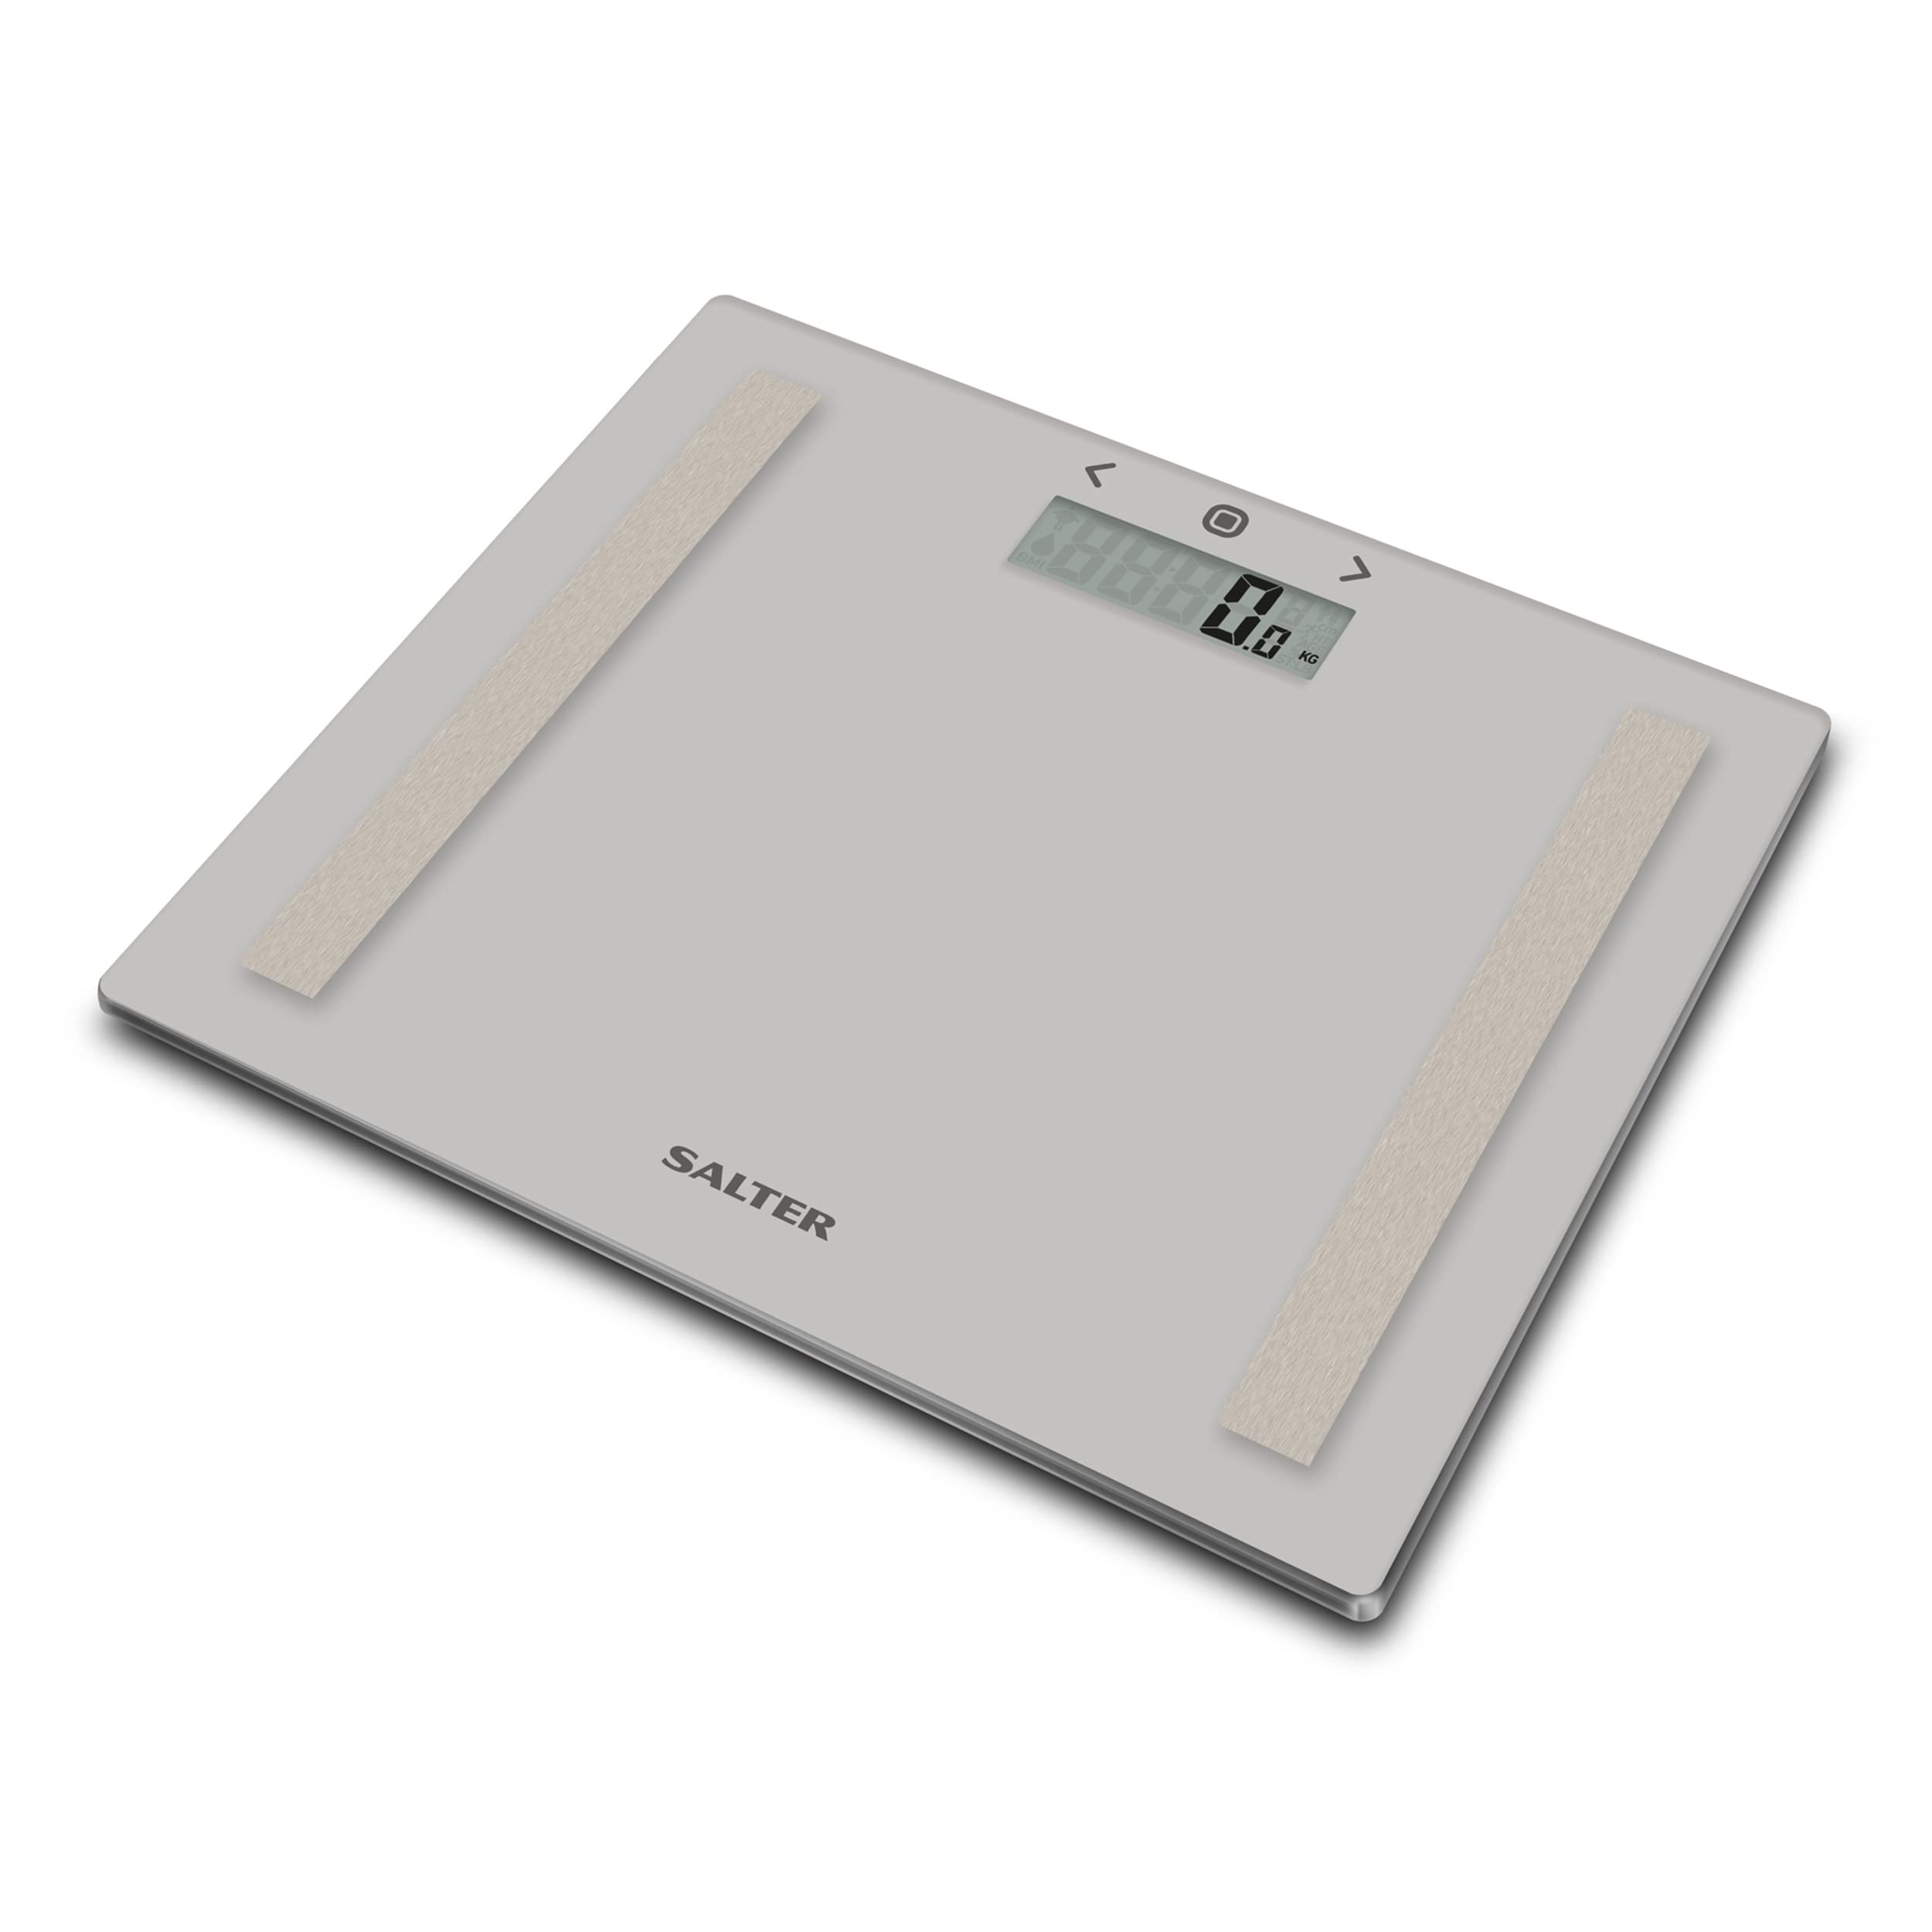 Salter 9113 GY3R Compact Glass Analyser Scale, Digital Bathroom Scale, 150 KG Maximum Capacity, 8 User Memory, Slim Design for Neat Storage, Athlete Mode, Measures Weight, Body Fat/Water & BMI, Grey